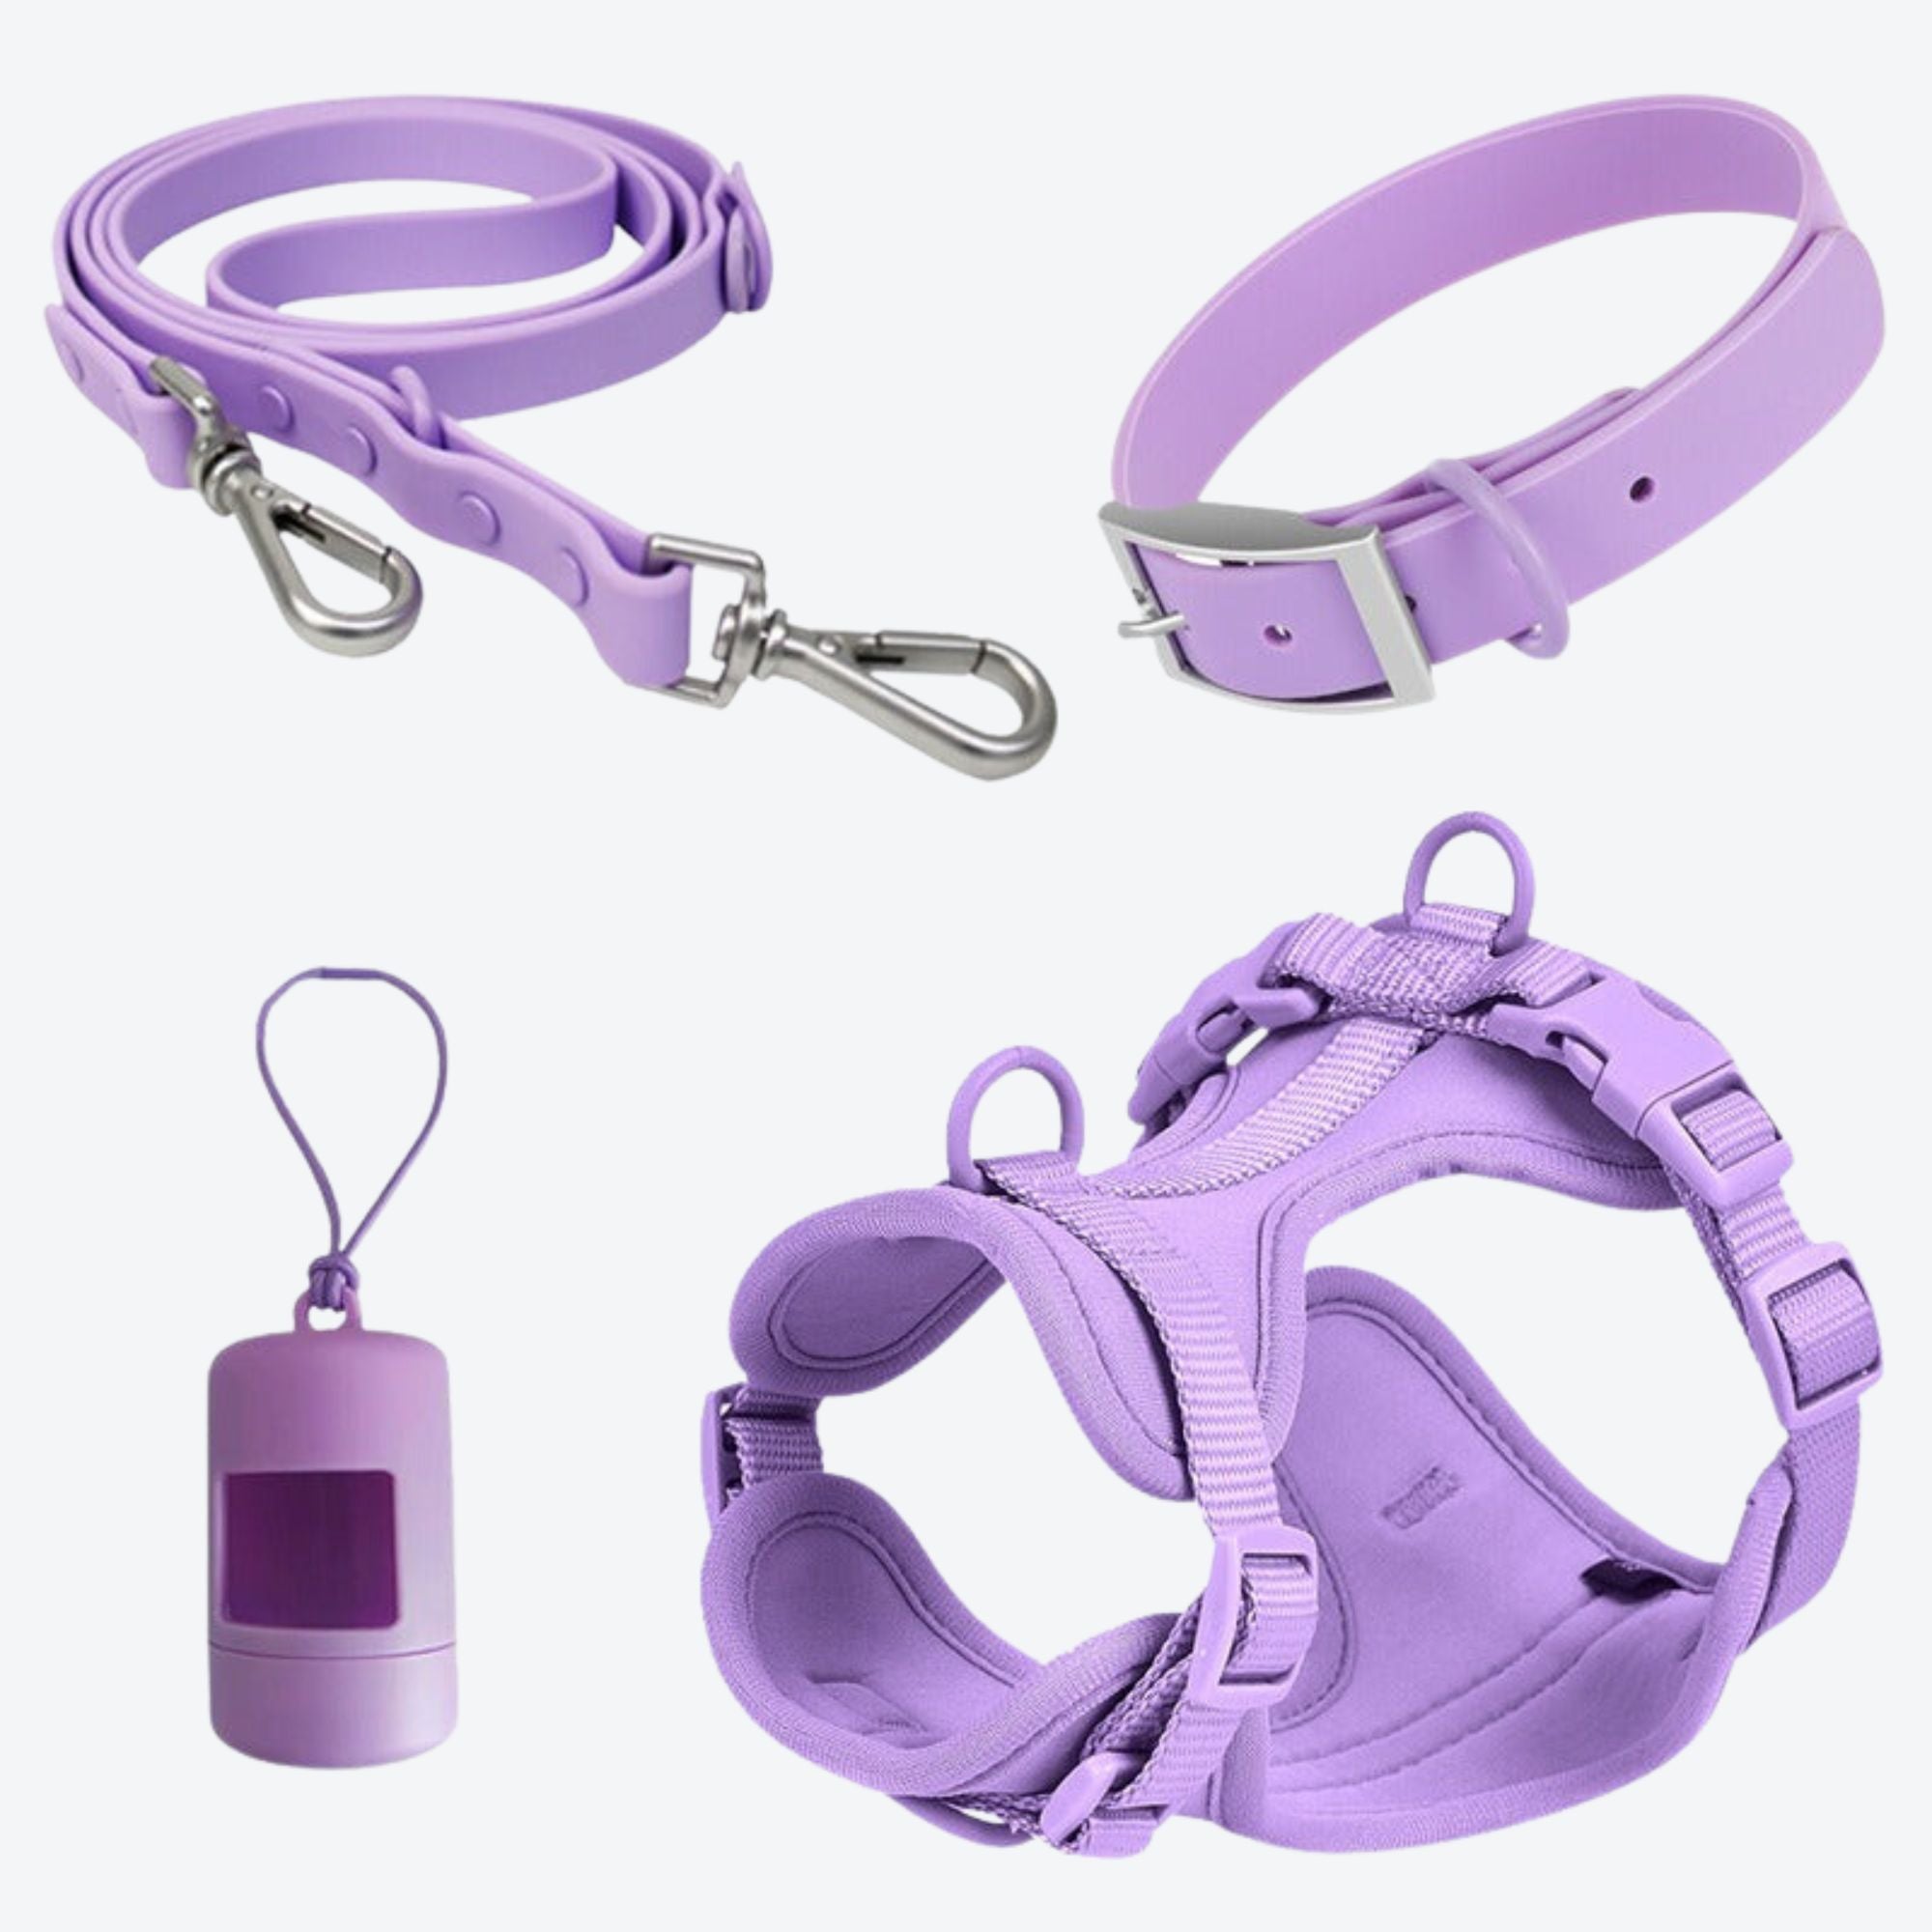 Purple Puppy dog toy with walking leash!